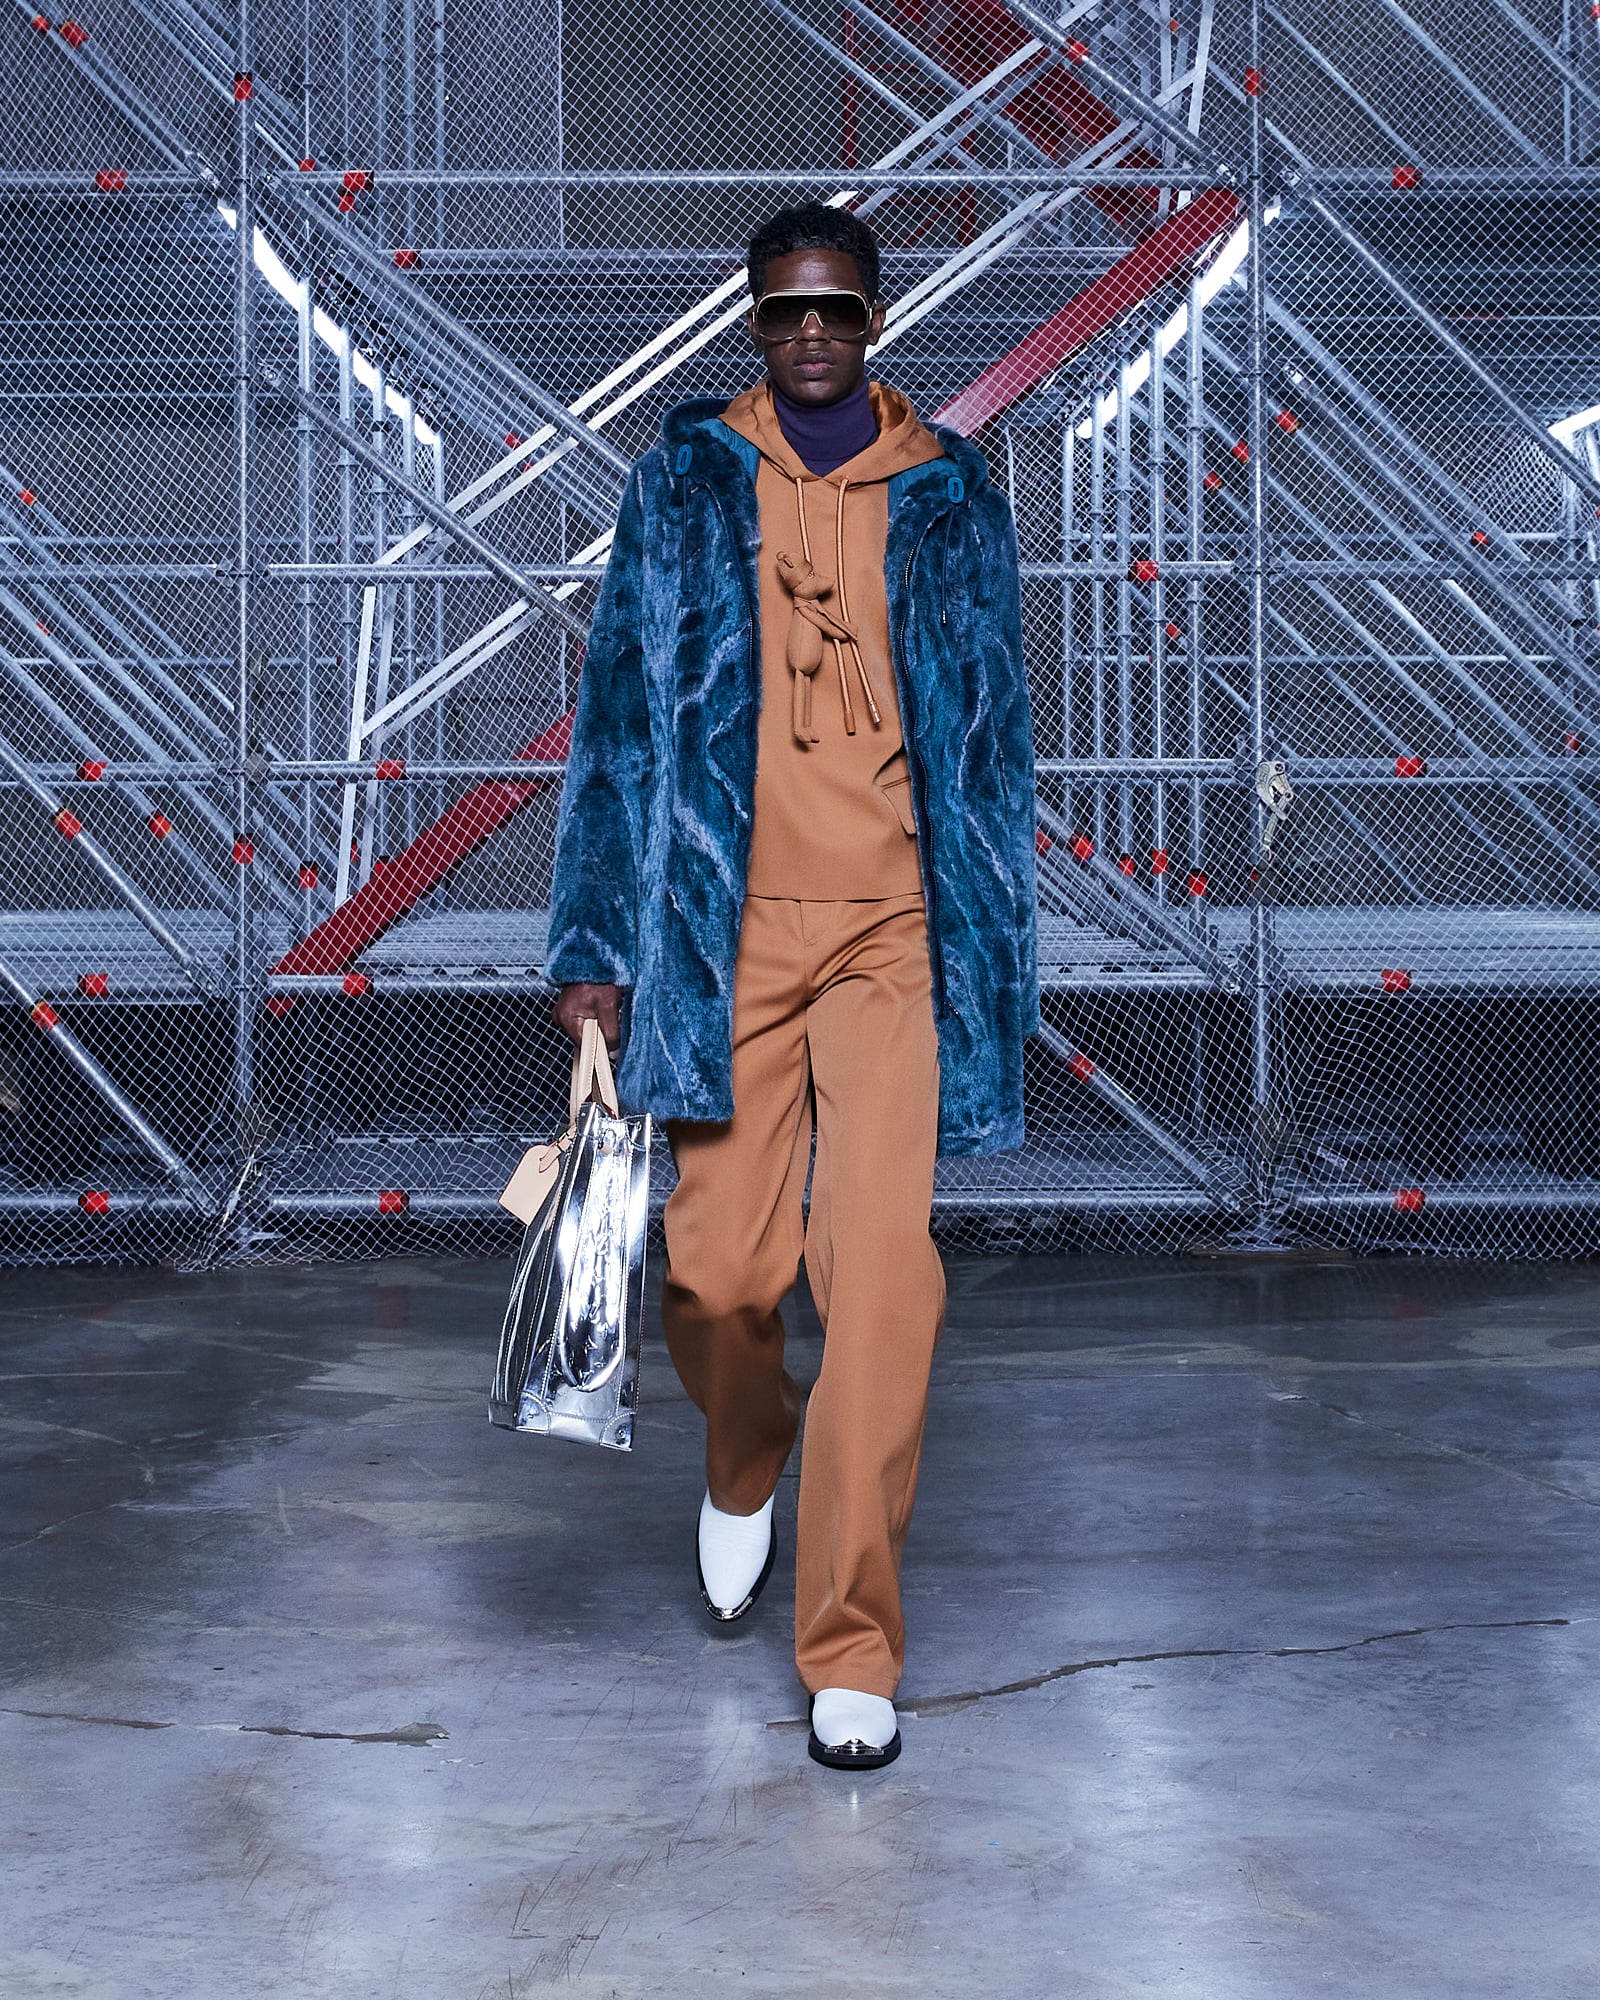 Louis Vuitton Presents Its Men's Fall/Winter 2021 Spin-Off Show in